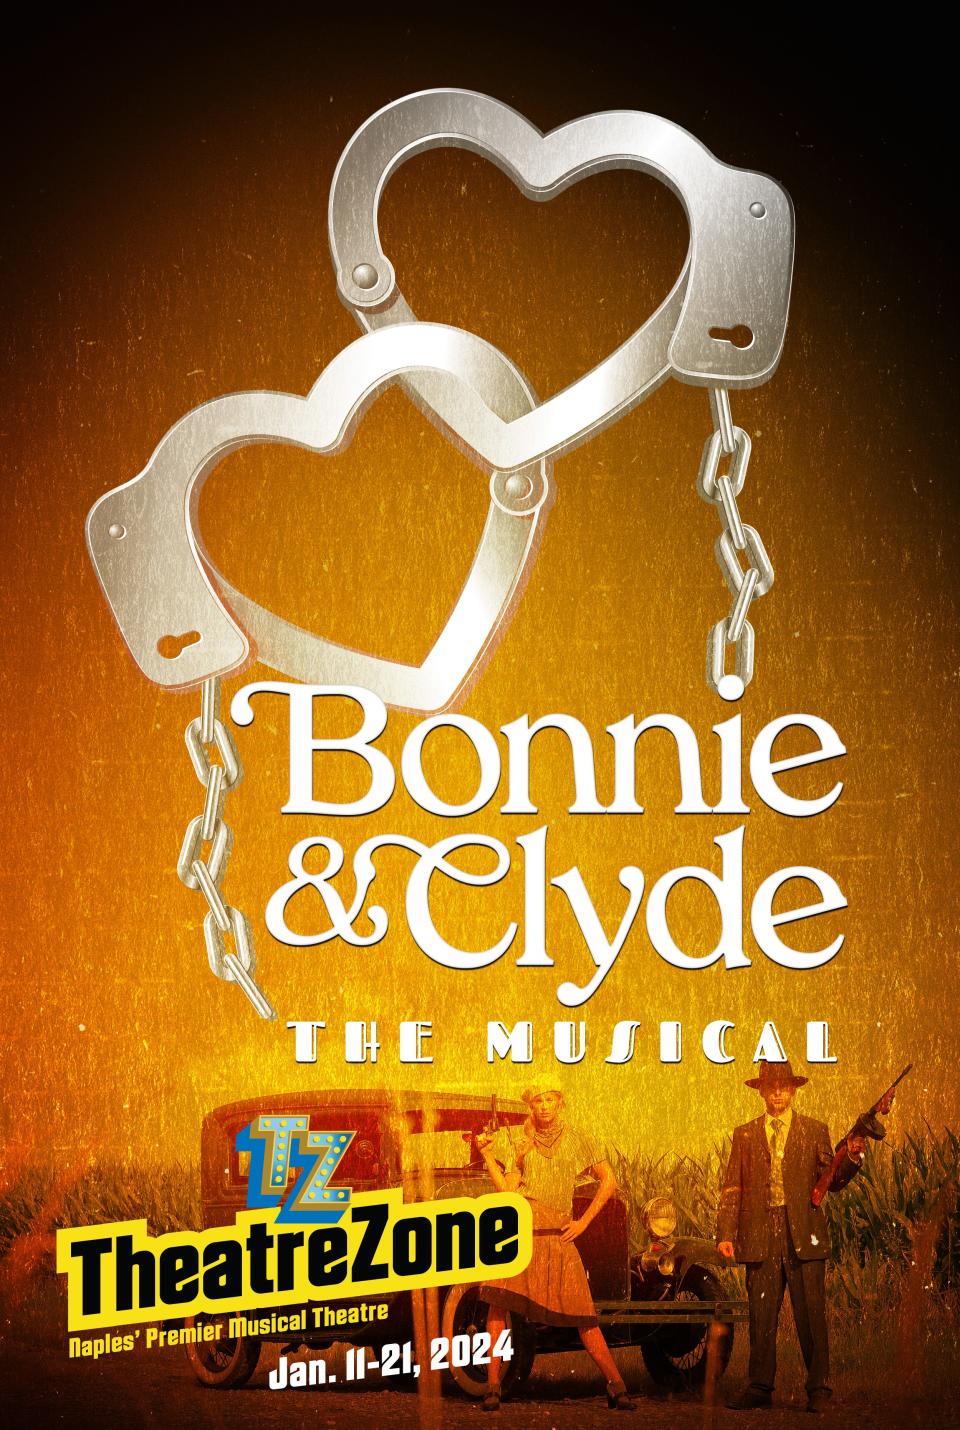 "Bonnie & Clyde: The Musical" is the latest production from TheatreZone in Naples, which runs Jan. 11-21, 2024.